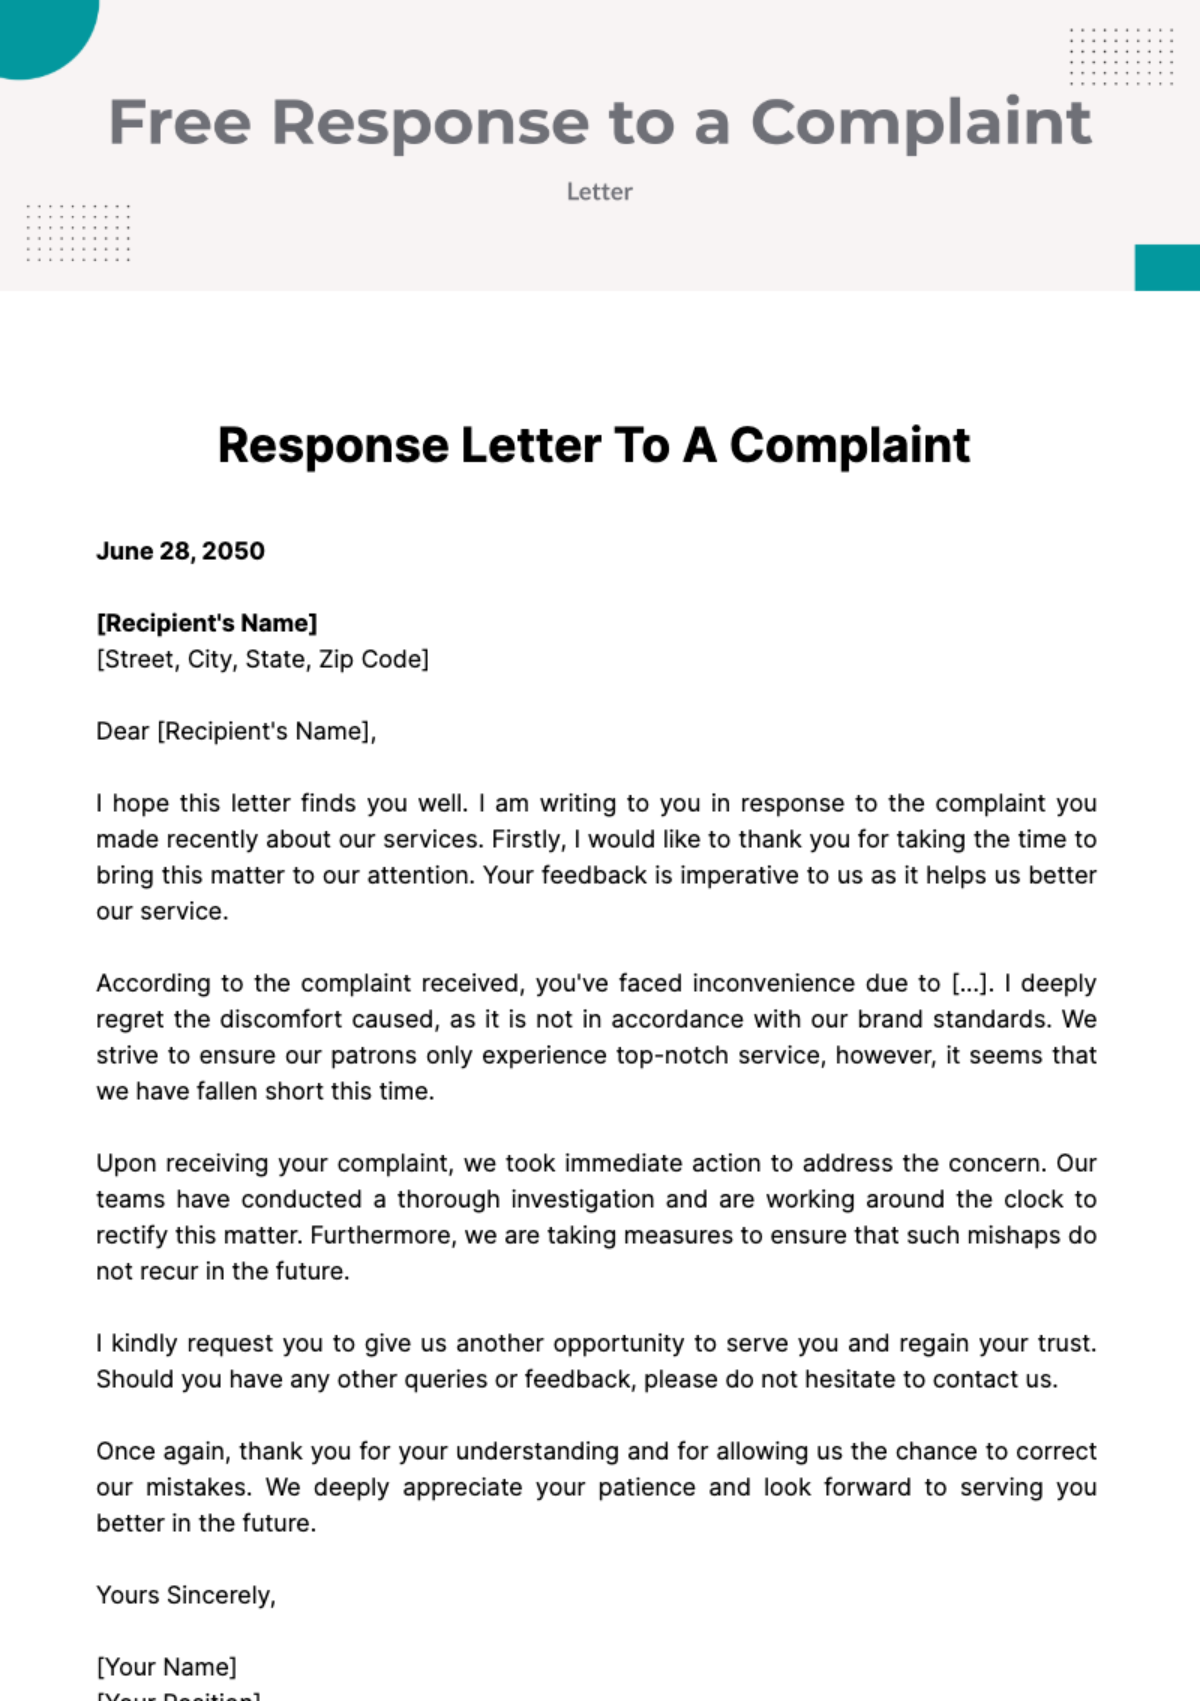 Response Letter to a Complaint Template